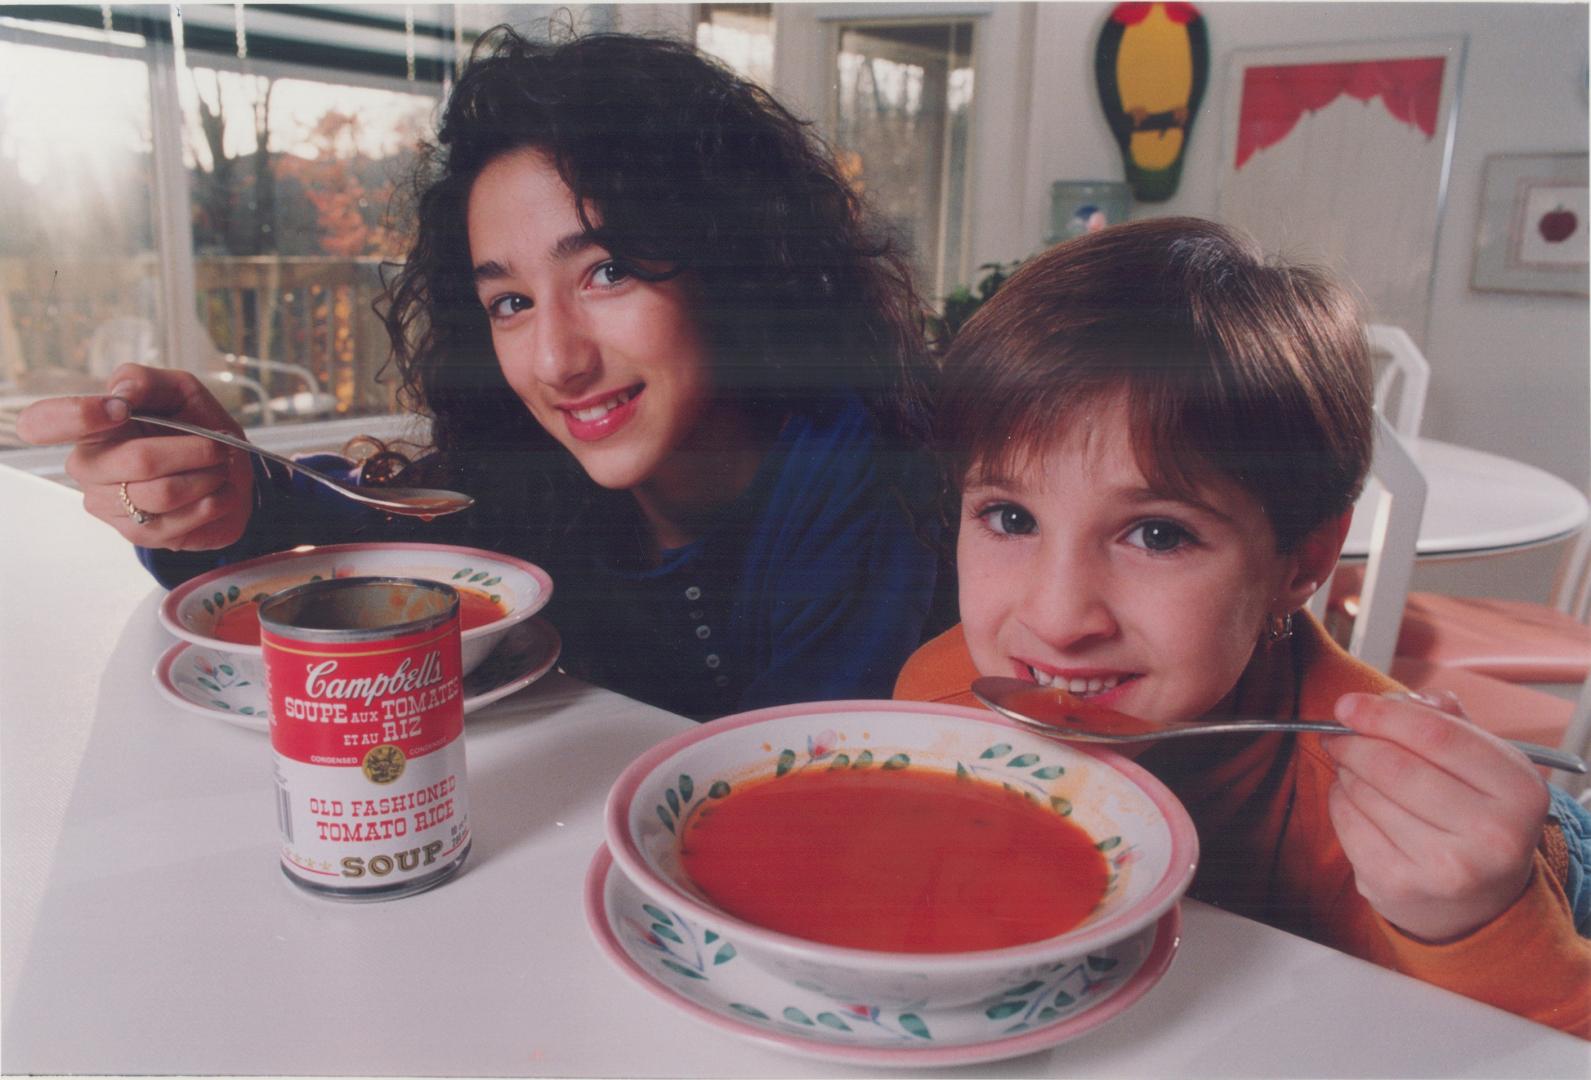 Esso tiger made a comeback in '92, Labatt's La Dry campaign caught on before it was dropped, and kids kept spooning up Campbell's soups, but the ad firms behind all three got the gate